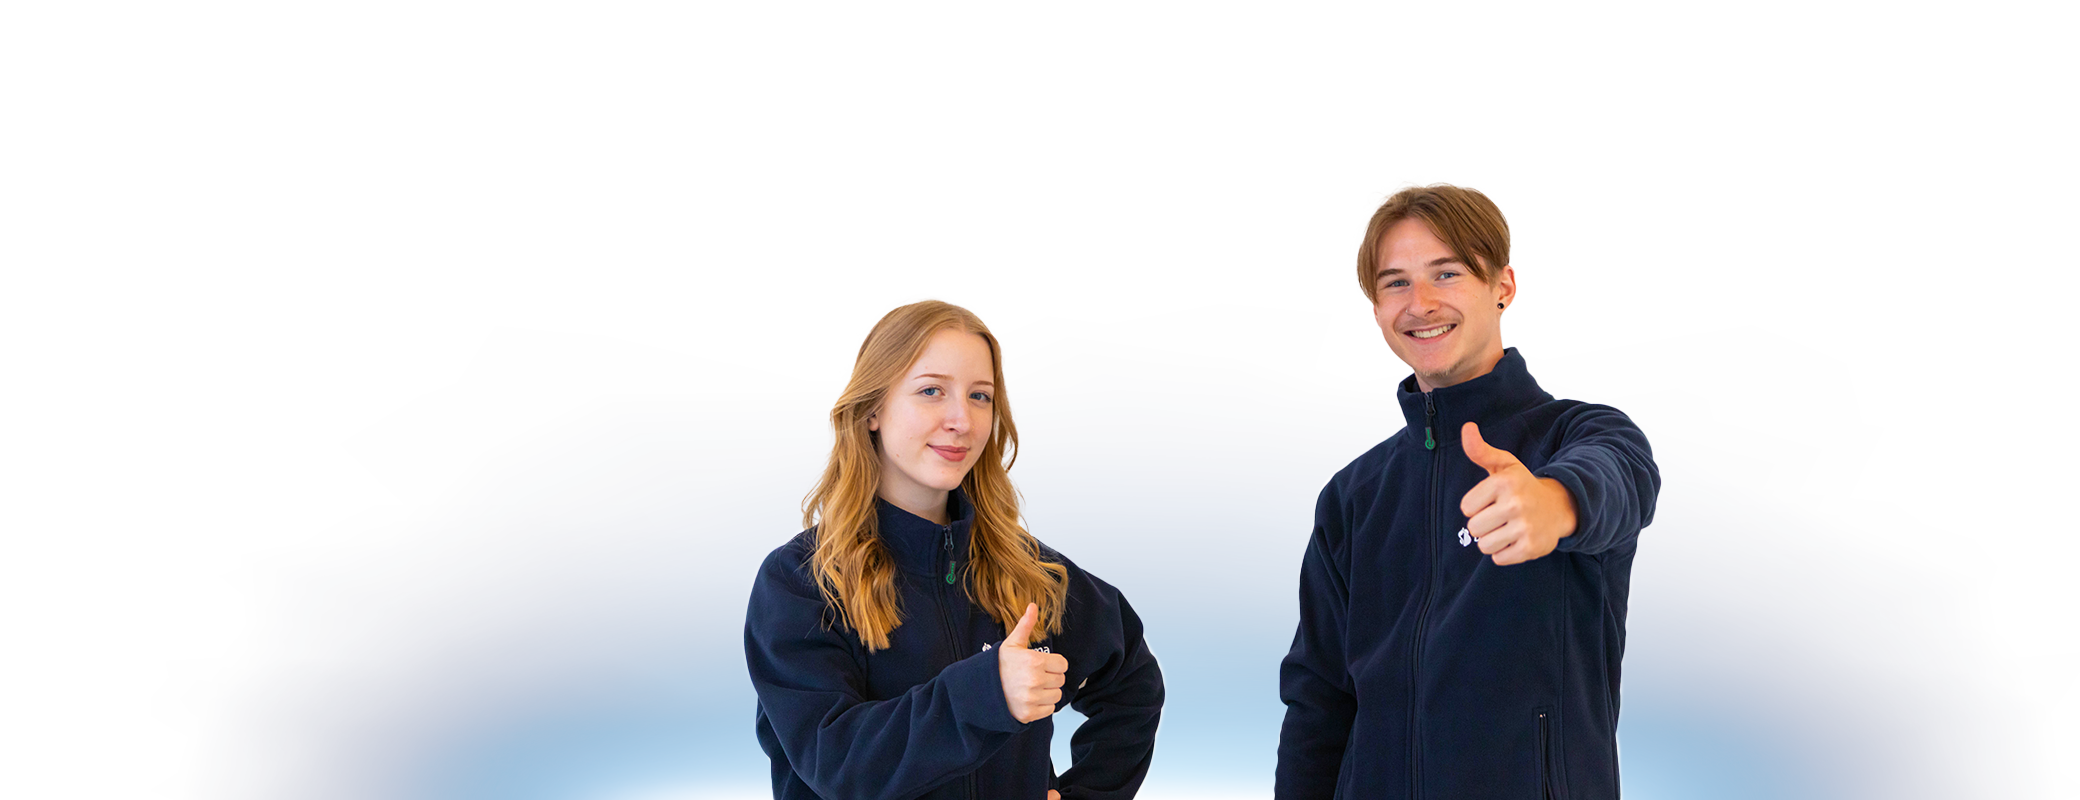 Two blue cinema employees giving a thumbs up as a sign of good service.